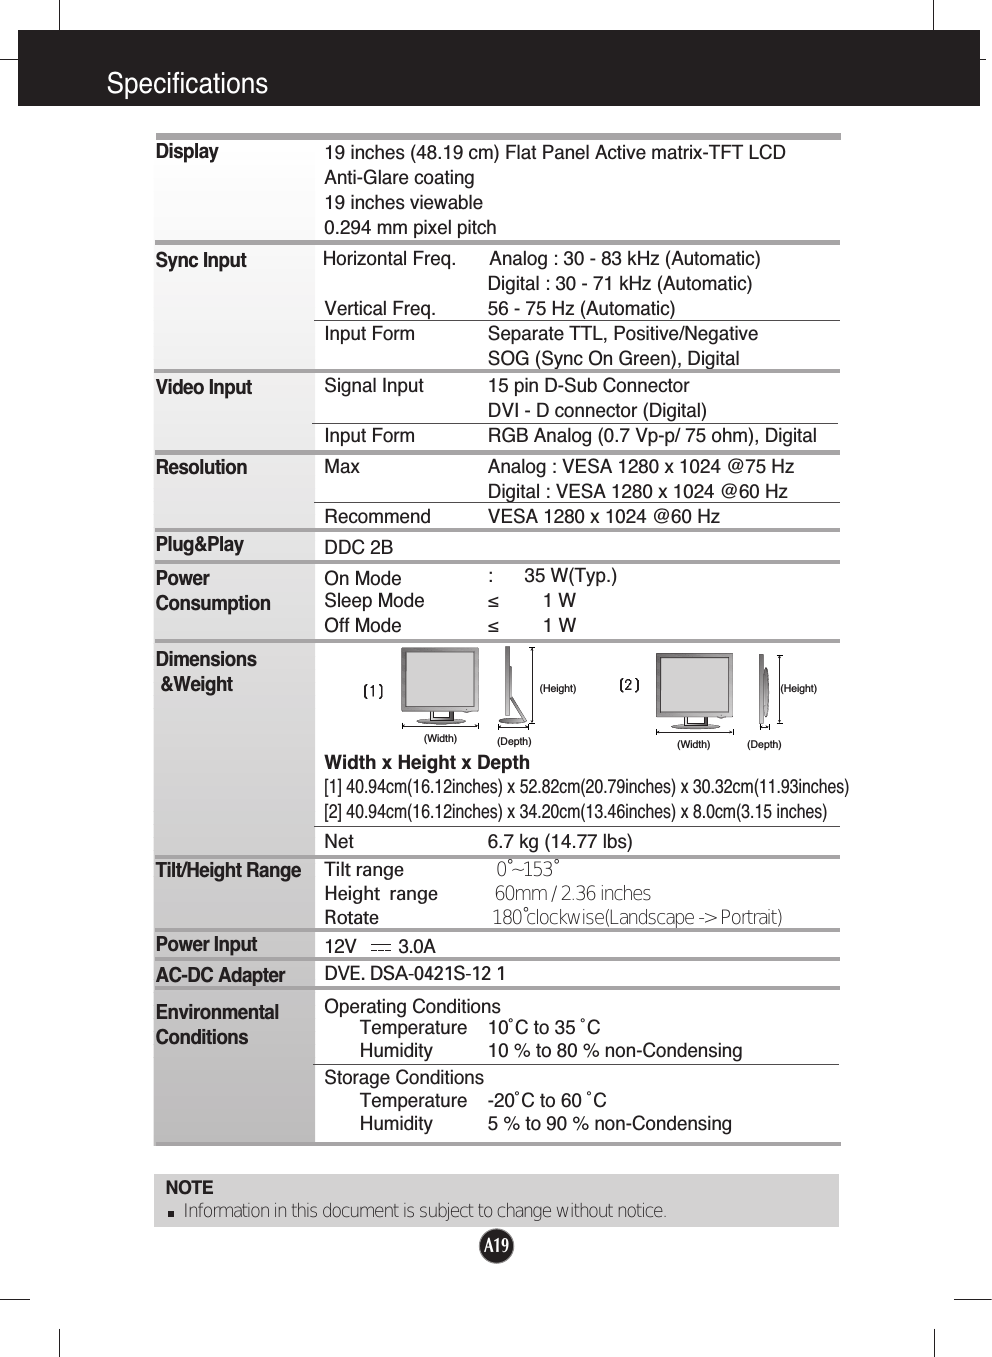 A19Specifications                                                                    NOTEInformation in this document is subject to change without notice.DisplaySync InputVideo InputResolutionPlug&amp;PlayPowerConsumptionDimensions&amp;WeightTilt/Height RangePower InputAC-DC AdapterEnvironmentalConditions19 inches (48.19 cm) Flat Panel Active matrix-TFT LCD Anti-Glare coating19 inches viewable0.294 mm pixel pitchHorizontal Freq. Analog : 30 - 83 kHz (Automatic)Digital : 30 - 71 kHz (Automatic)Vertical Freq. 56 - 75 Hz (Automatic)Input Form Separate TTL, Positive/NegativeSOG (Sync On Green), DigitalSignal Input 15 pin D-Sub ConnectorDVI - D connector (Digital)Input Form RGB Analog (0.7 Vp-p/ 75 ohm), DigitalMax Analog : VESA 1280 x 1024 @75 HzDigital : VESA 1280 x 1024 @60 HzRecommend VESA 1280 x 1024 @60 HzDDC 2BOn Mode :      35 W(Typ.)Sleep Mode ≤ 1 WOff Mode ≤ 1 WWidth x Height x Depth[1] 40.94cm(16.12inches) x 52.82cm(20.79inches) x 30.32cm(11.93inches)[2] 40.94cm(16.12inches) x 34.20cm(13.46inches) x 8.0cm(3.15 inches)Net 6.7 kg (14.77 lbs)Tilt range 0˚~153˚Height range            60mm / 2.36 inchesRotate  180˚clockwise(Landscape -&gt; Portrait)12V         3.0ADVE. DSA-0421S-12 1Operating ConditionsTemperature 10˚C to 35 ˚CHumidity 10 % to 80 % non-CondensingStorage ConditionsTemperature -20˚C to 60 ˚CHumidity 5 % to 90 % non-Condensing(Width) (Depth)(Height)(Width) (Depth)(Height)